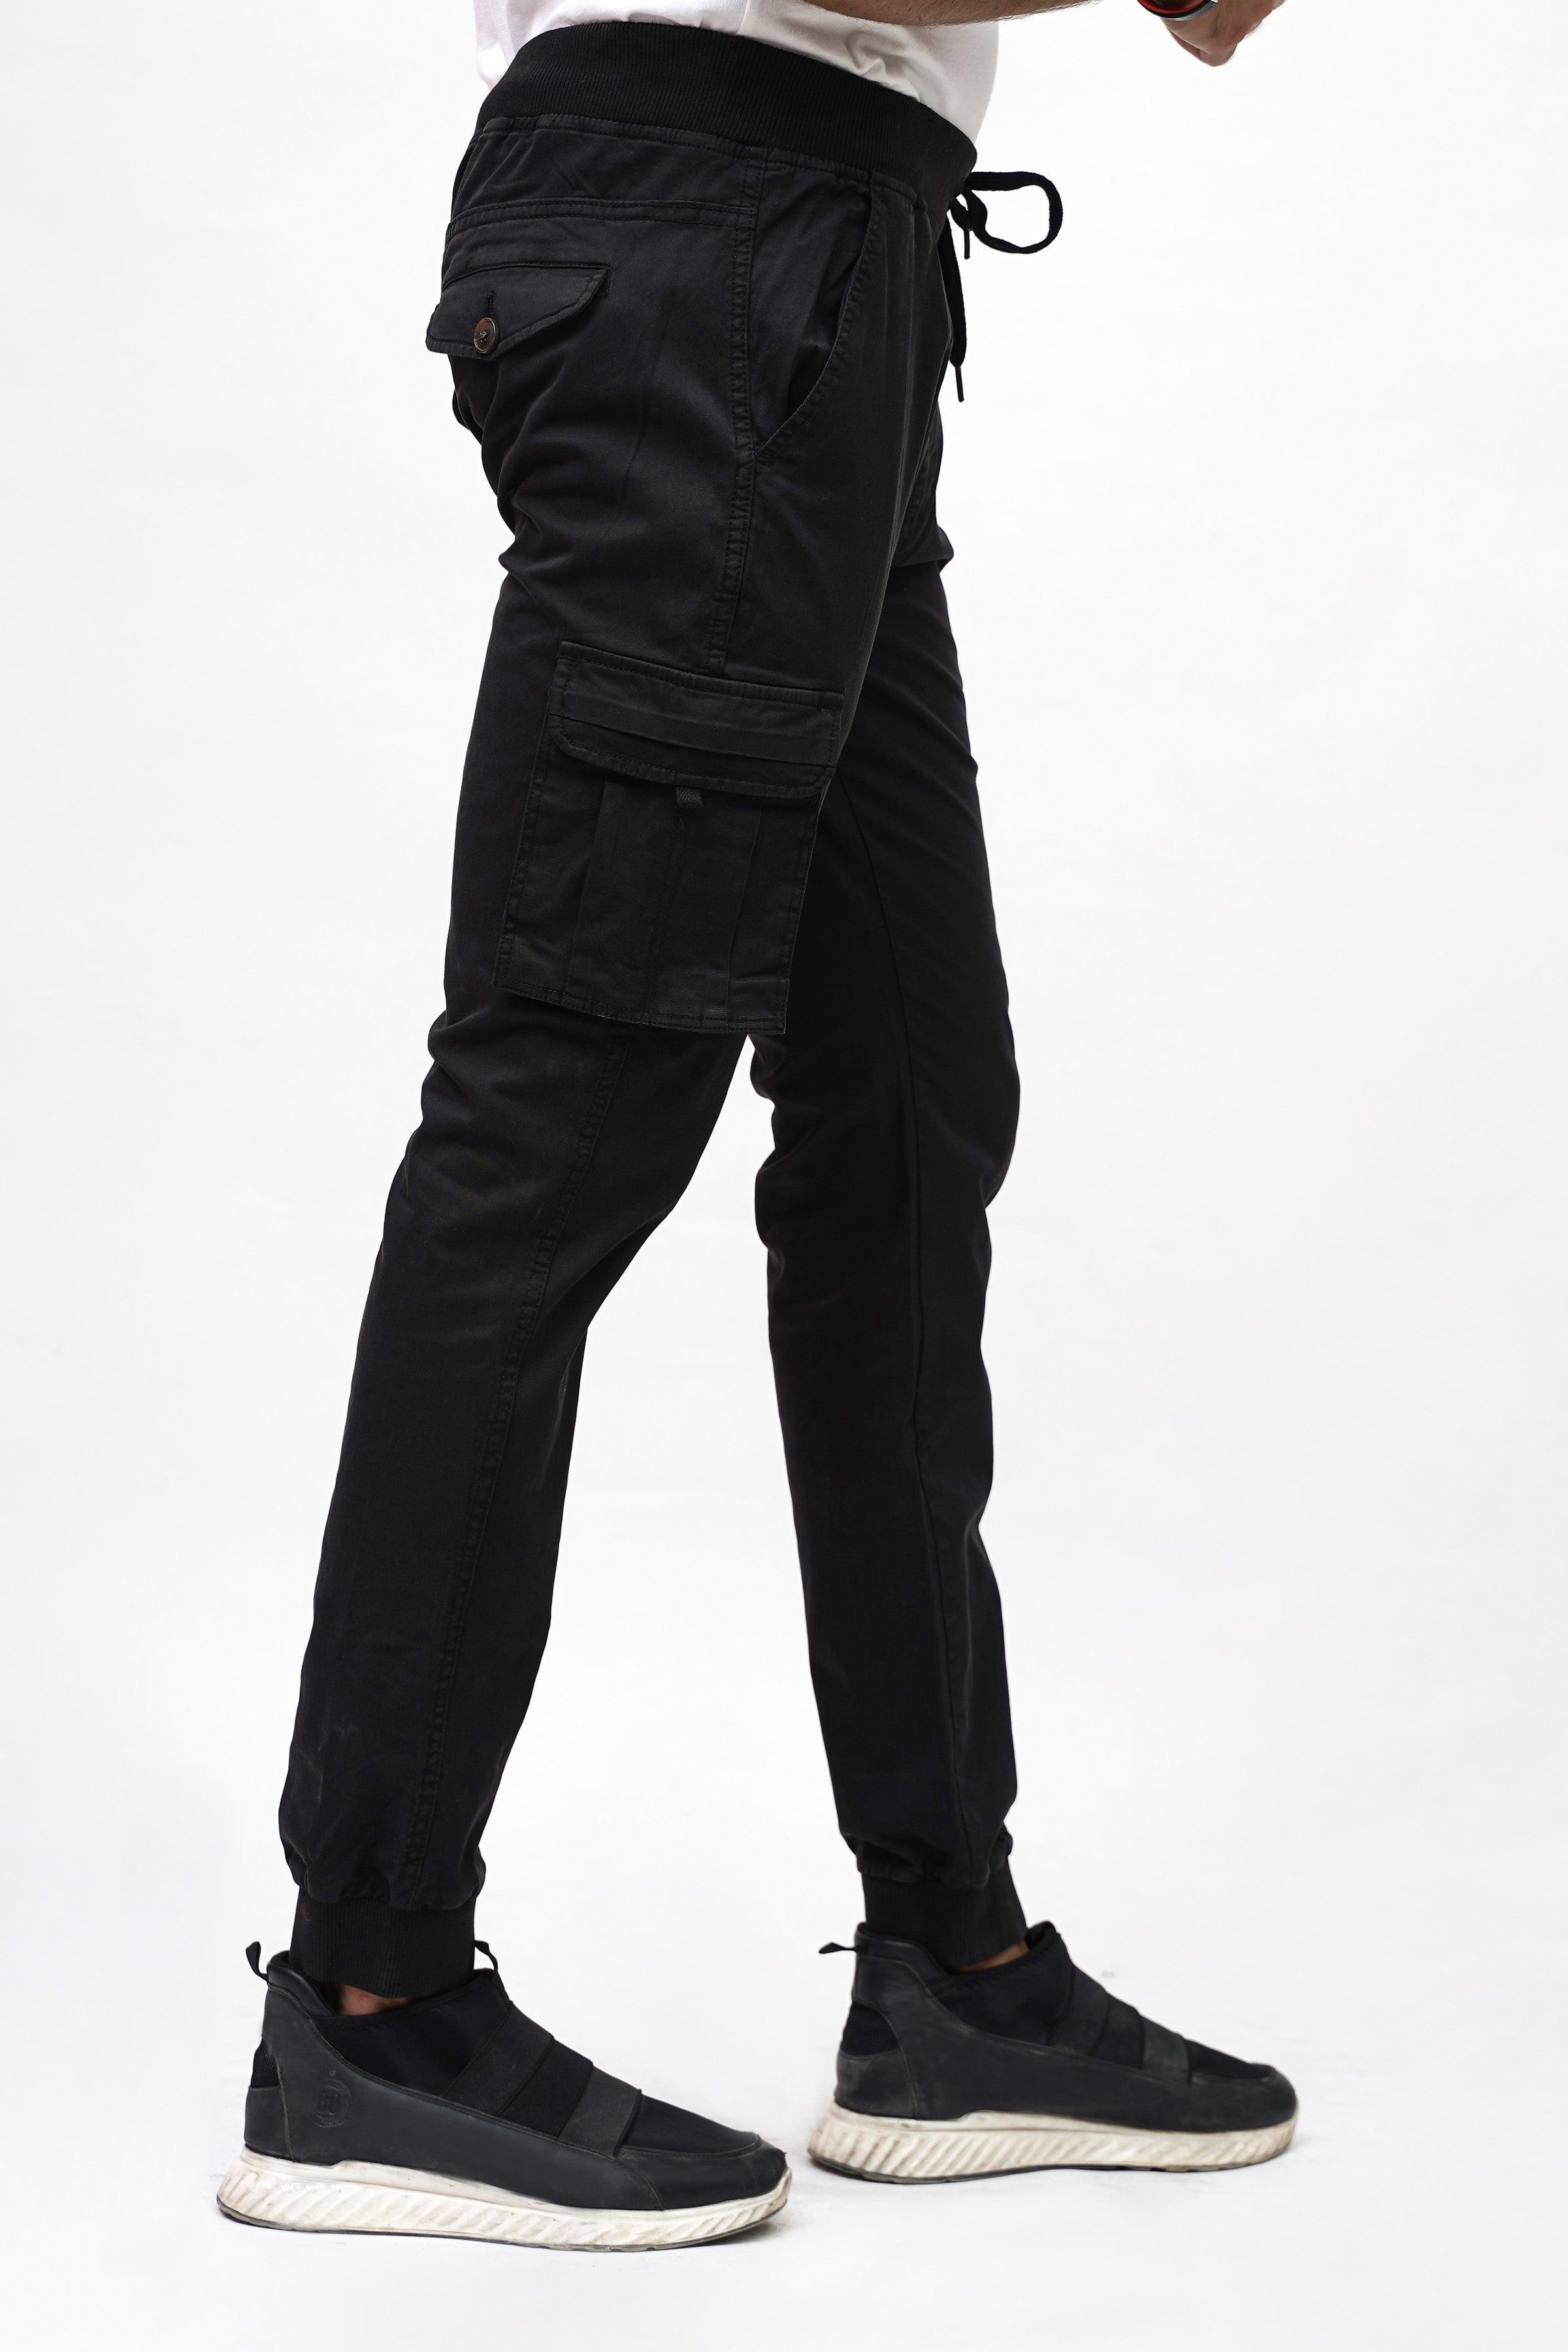 CARGO JOGGER SLIMFIT BLACK TROUSER at Charcoal Clothing